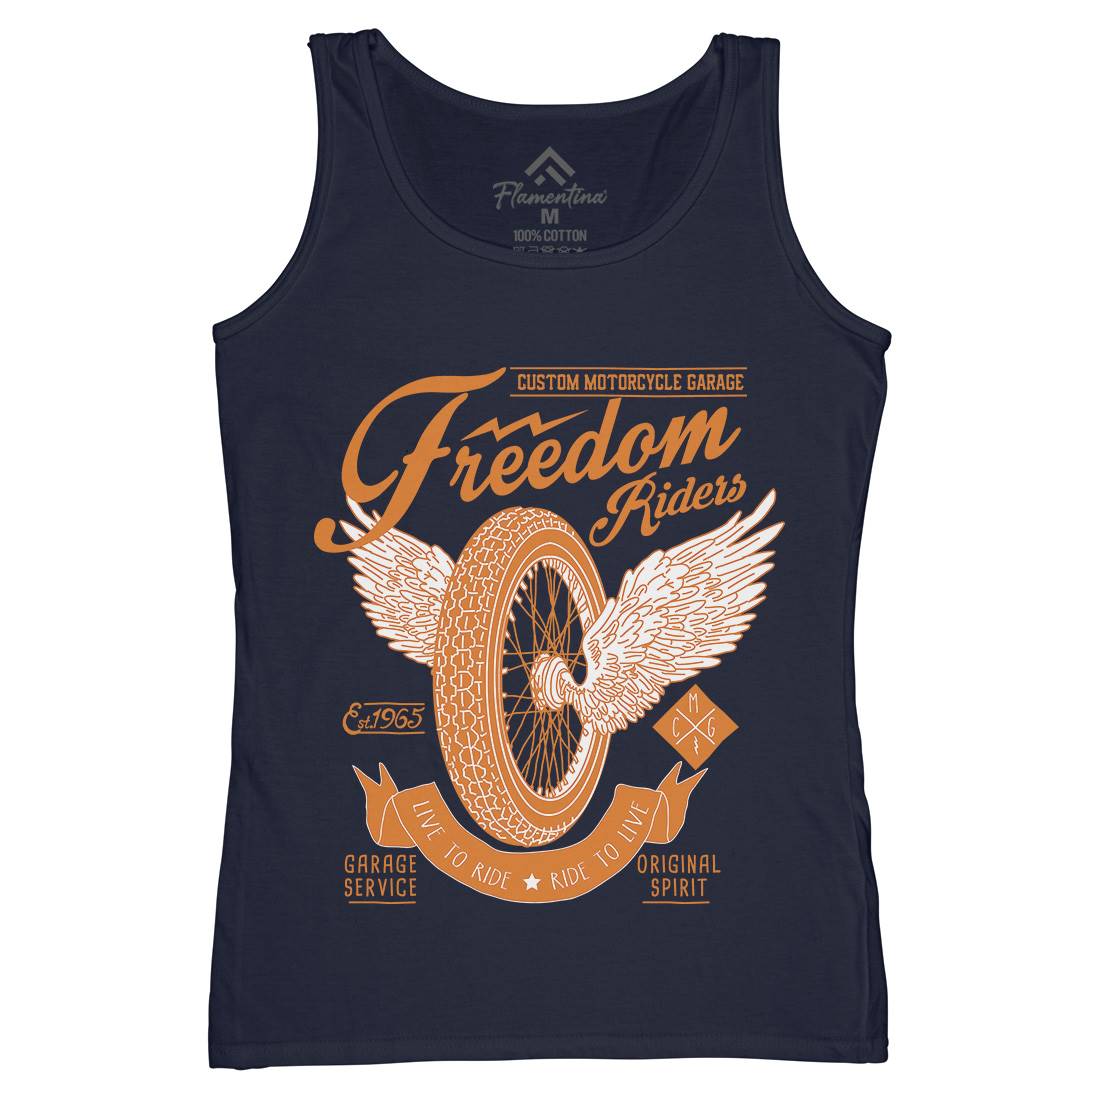 Freedom Riders Womens Organic Tank Top Vest Motorcycles A989